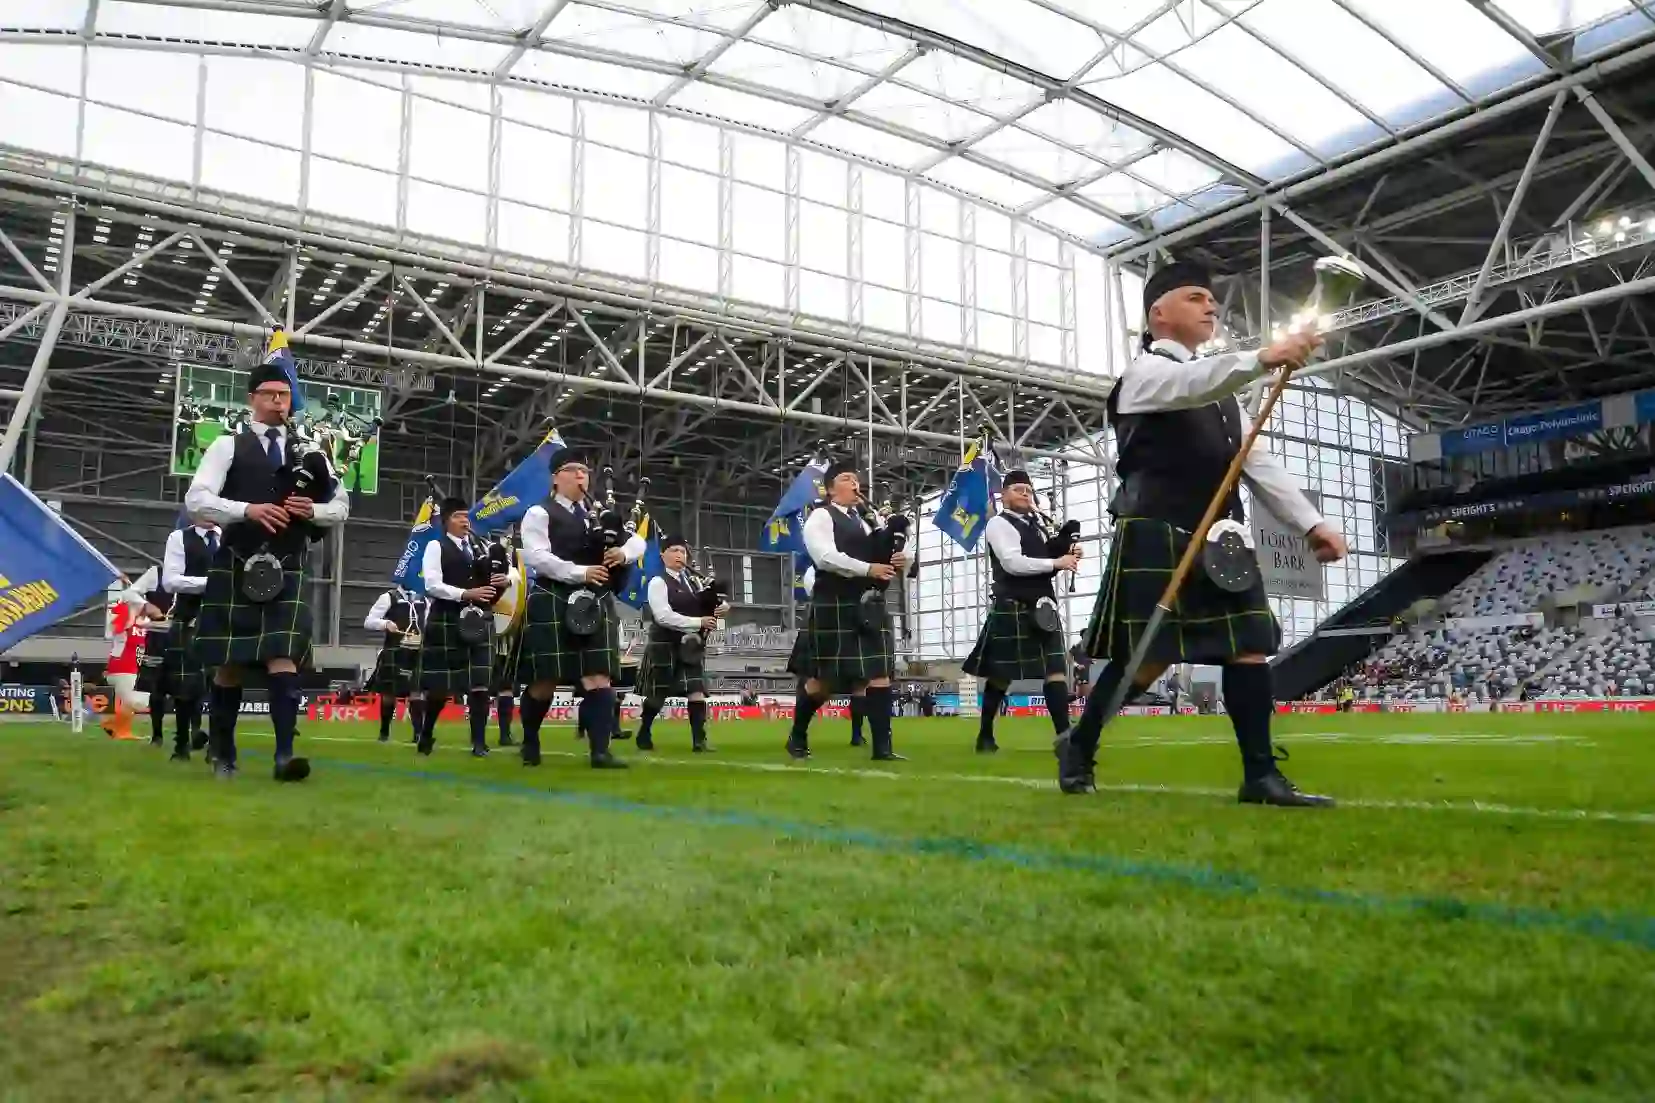 City of Dunedin Pipe Band performing in Forsyth Barr Stadium